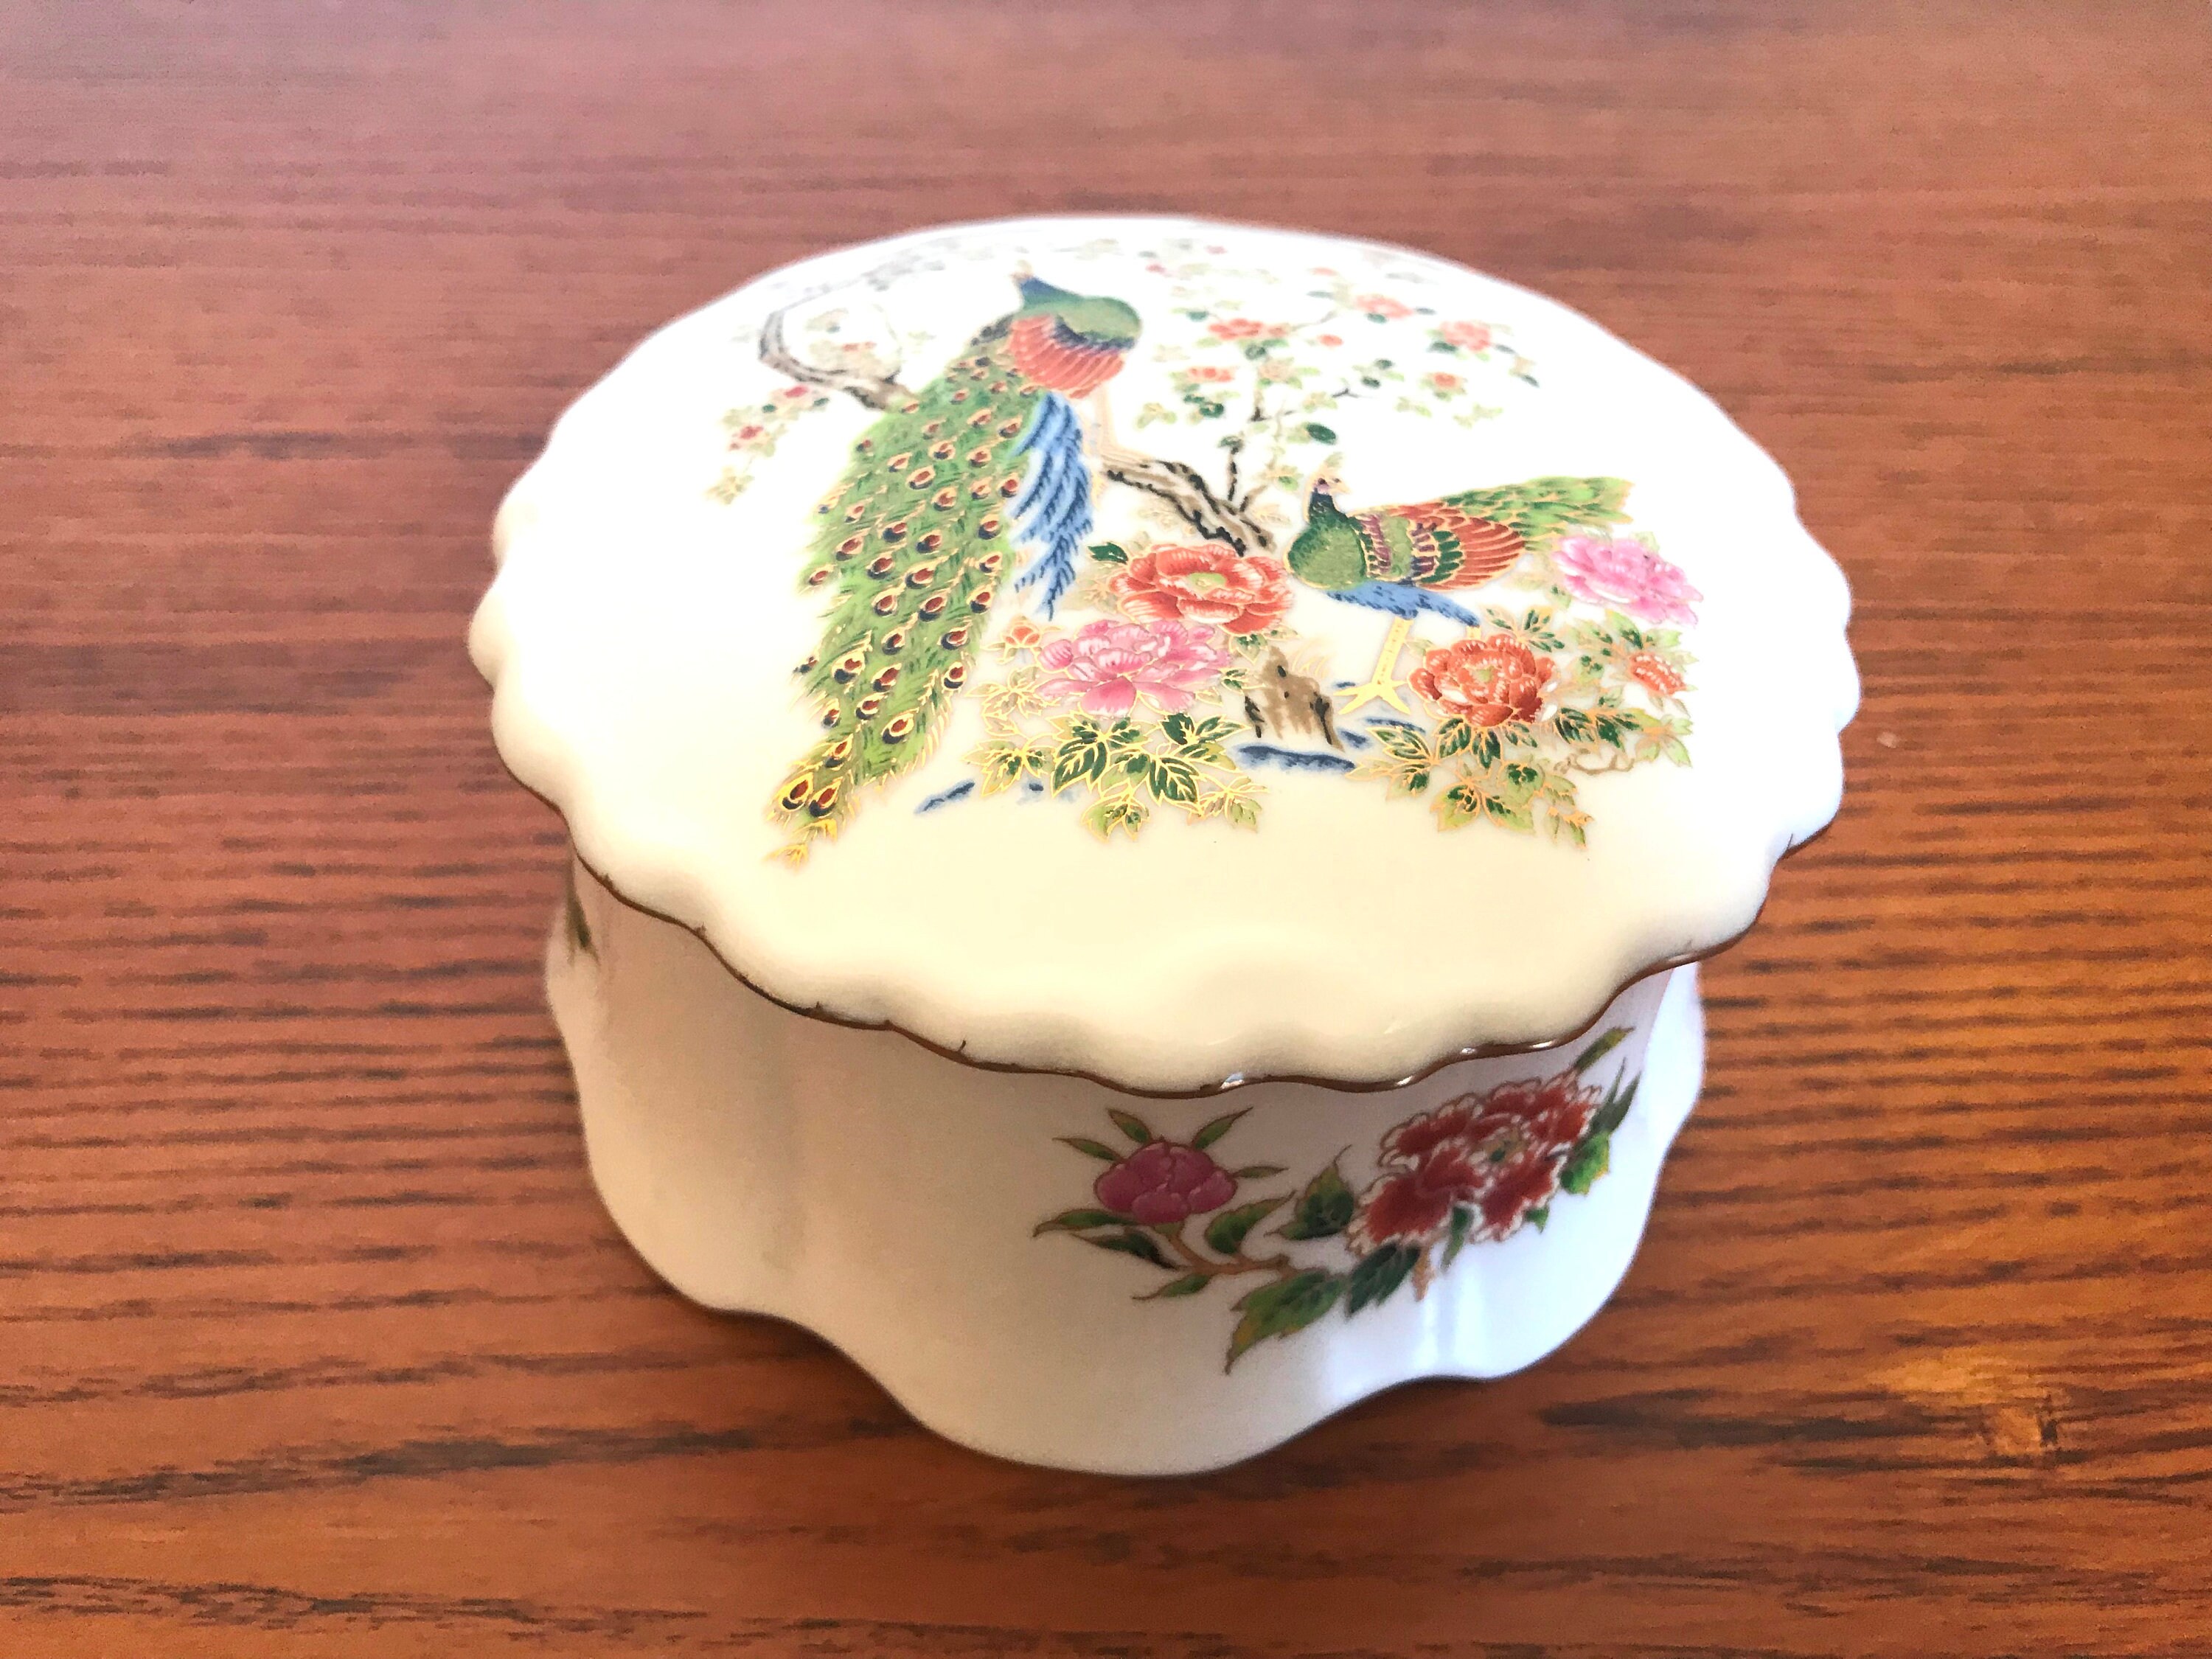 Vintage jewellery box with peacock porcelain trinket box made | Etsy